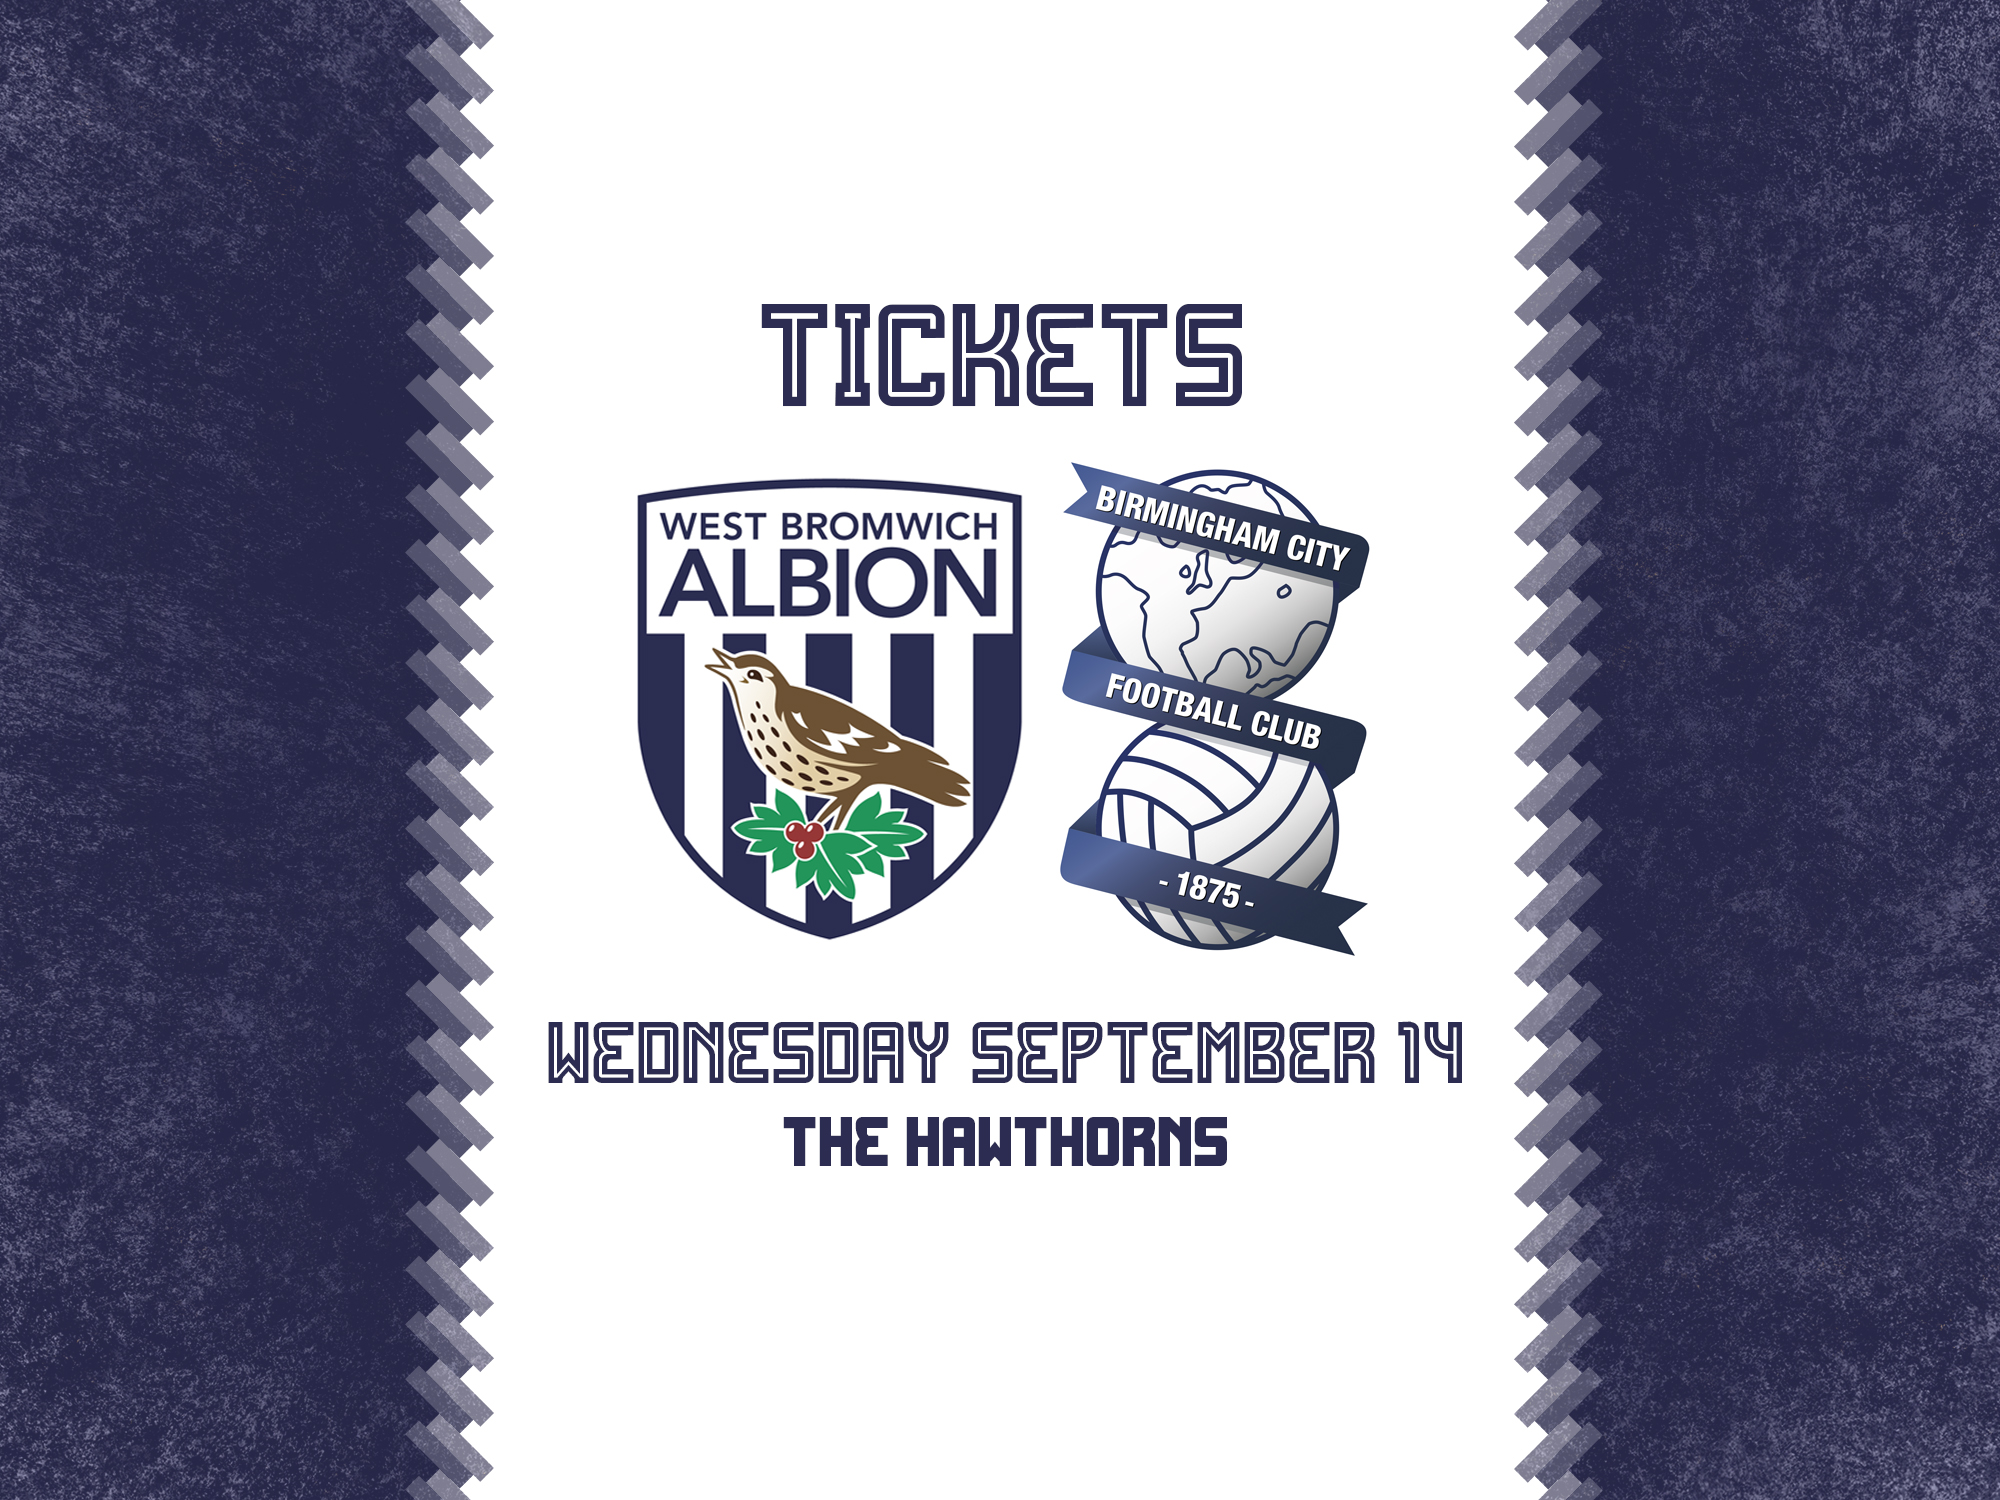 Tickets are now on general sale for Albion's game against Birmingham City